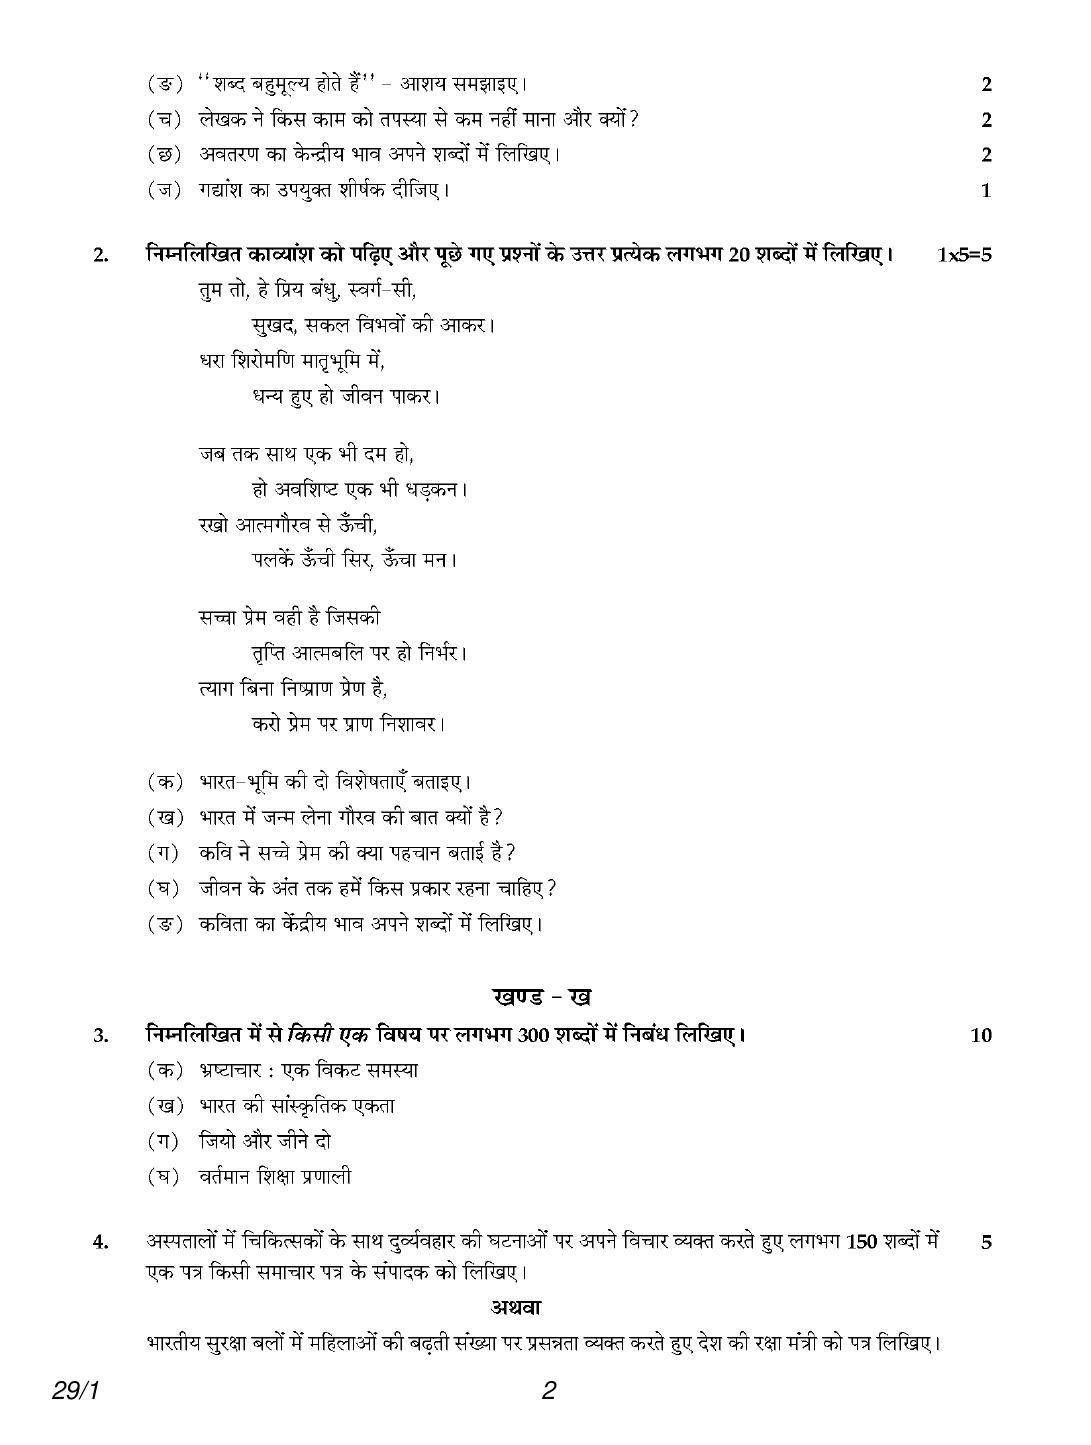 CBSE Class 12 29-1 Hindi Elective 2018 Question Paper - Page 2